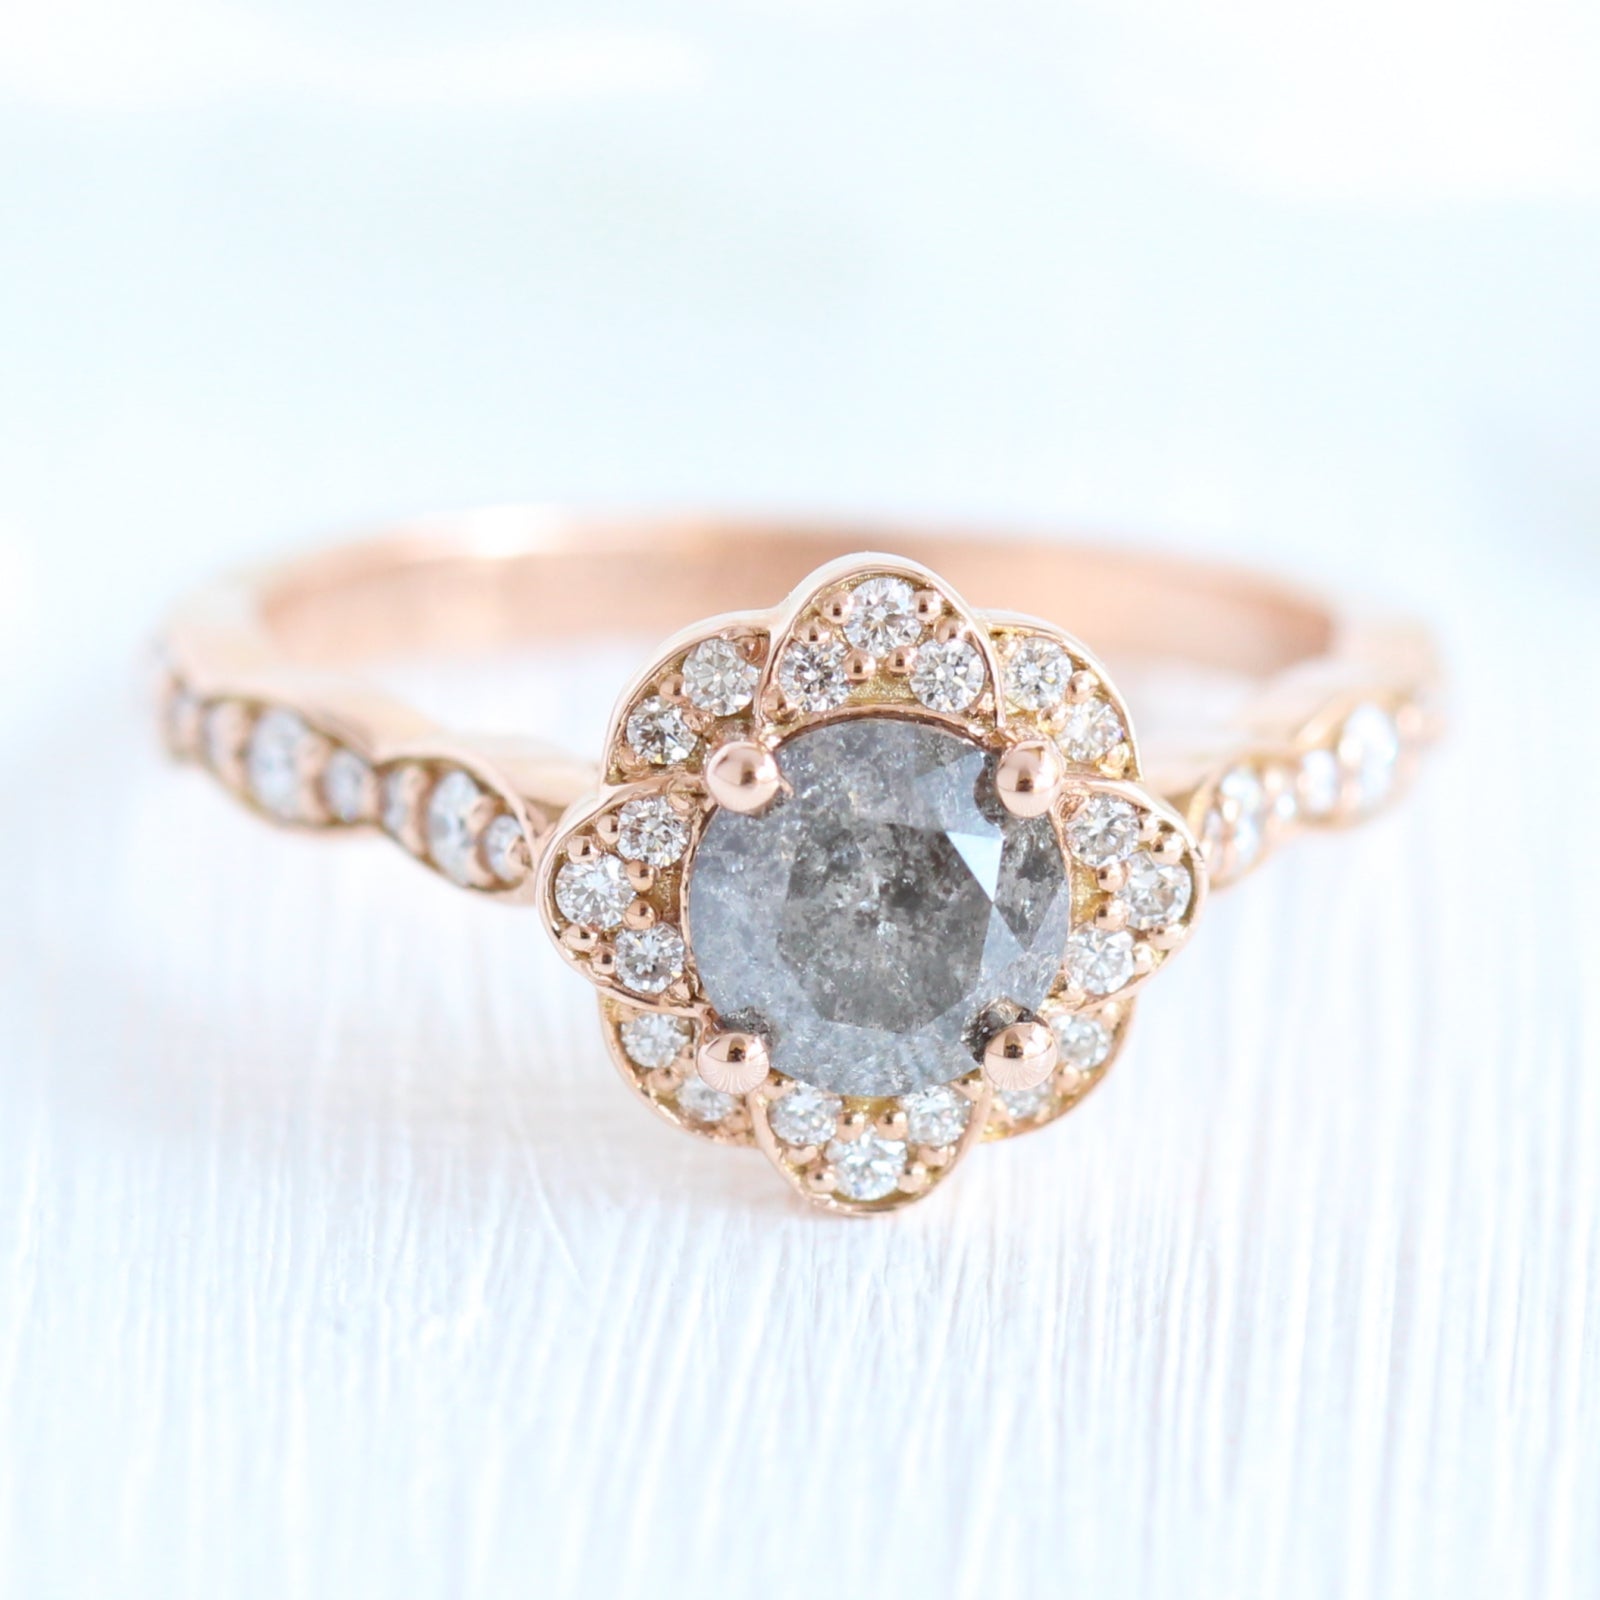 Grey salt & pepper diamond engagement ring in rose gold vintage floral diamond band by la more design jewelry